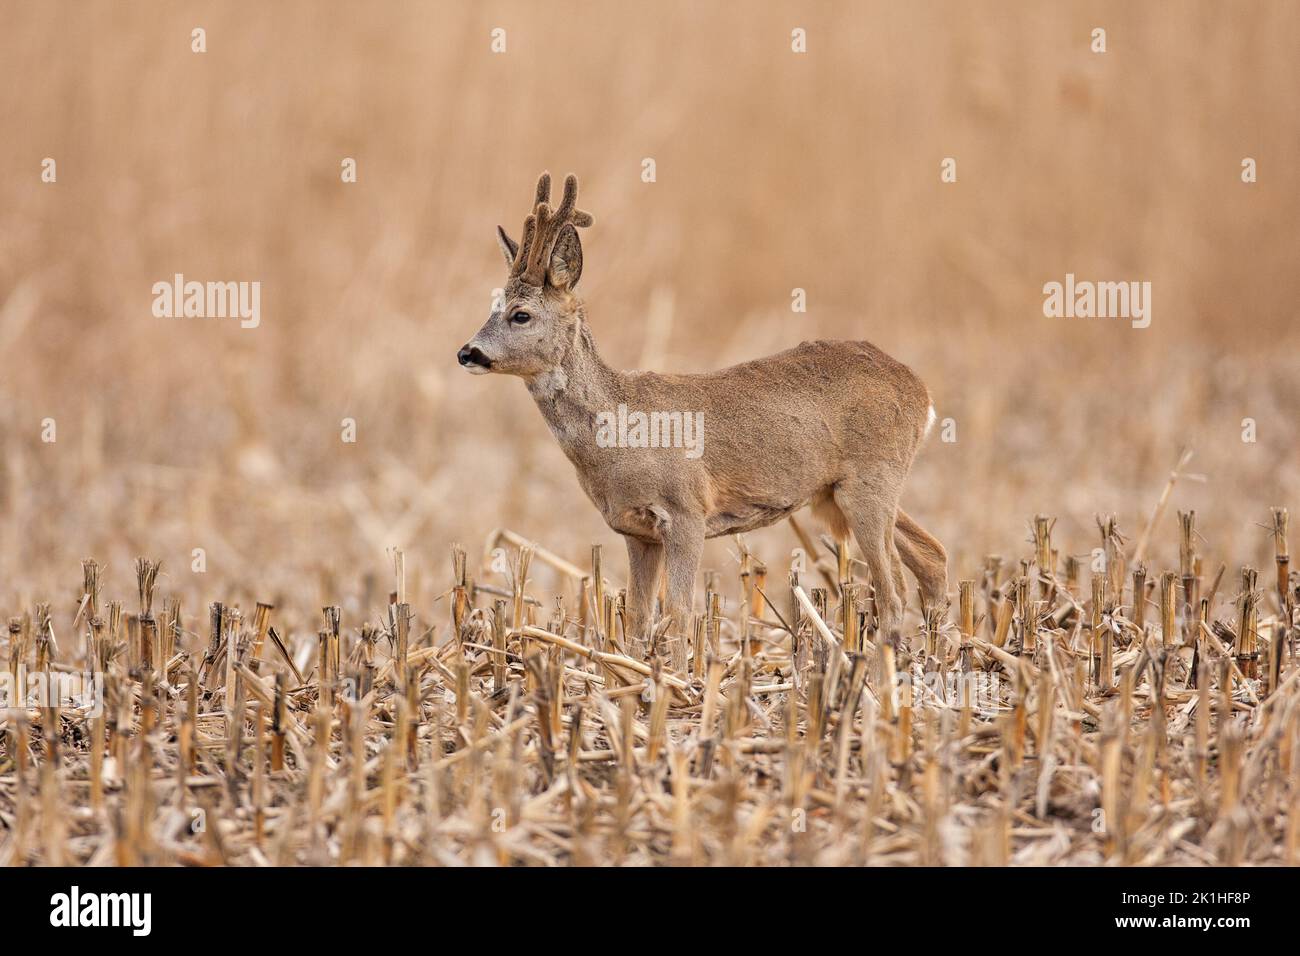 Roe deer buck with growing antlers covered in velvet on a corn stubble field. Stock Photo